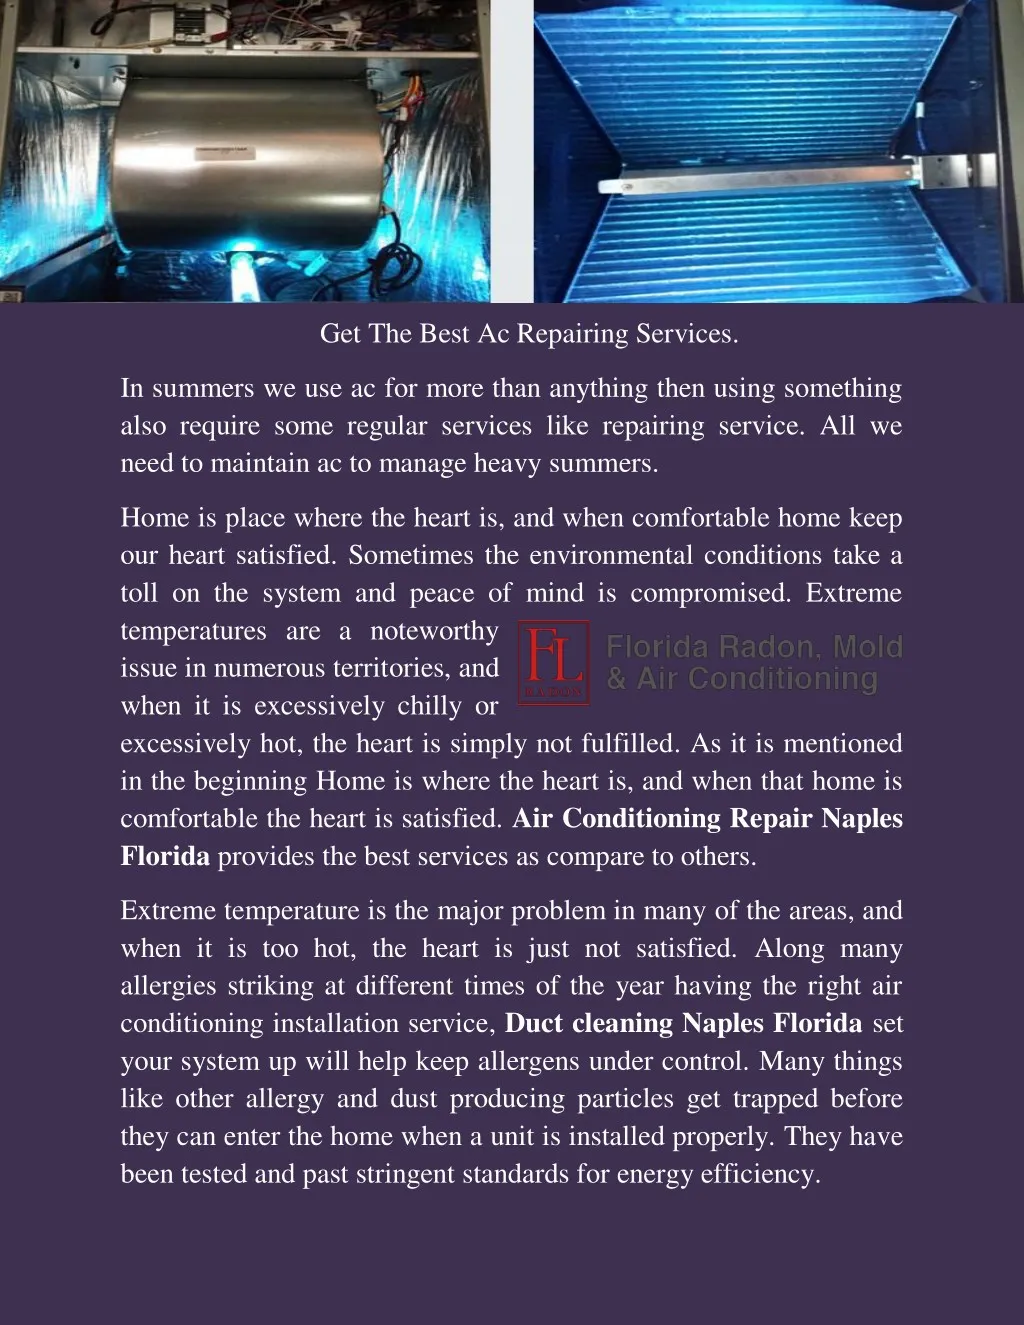 get the best ac repairing services